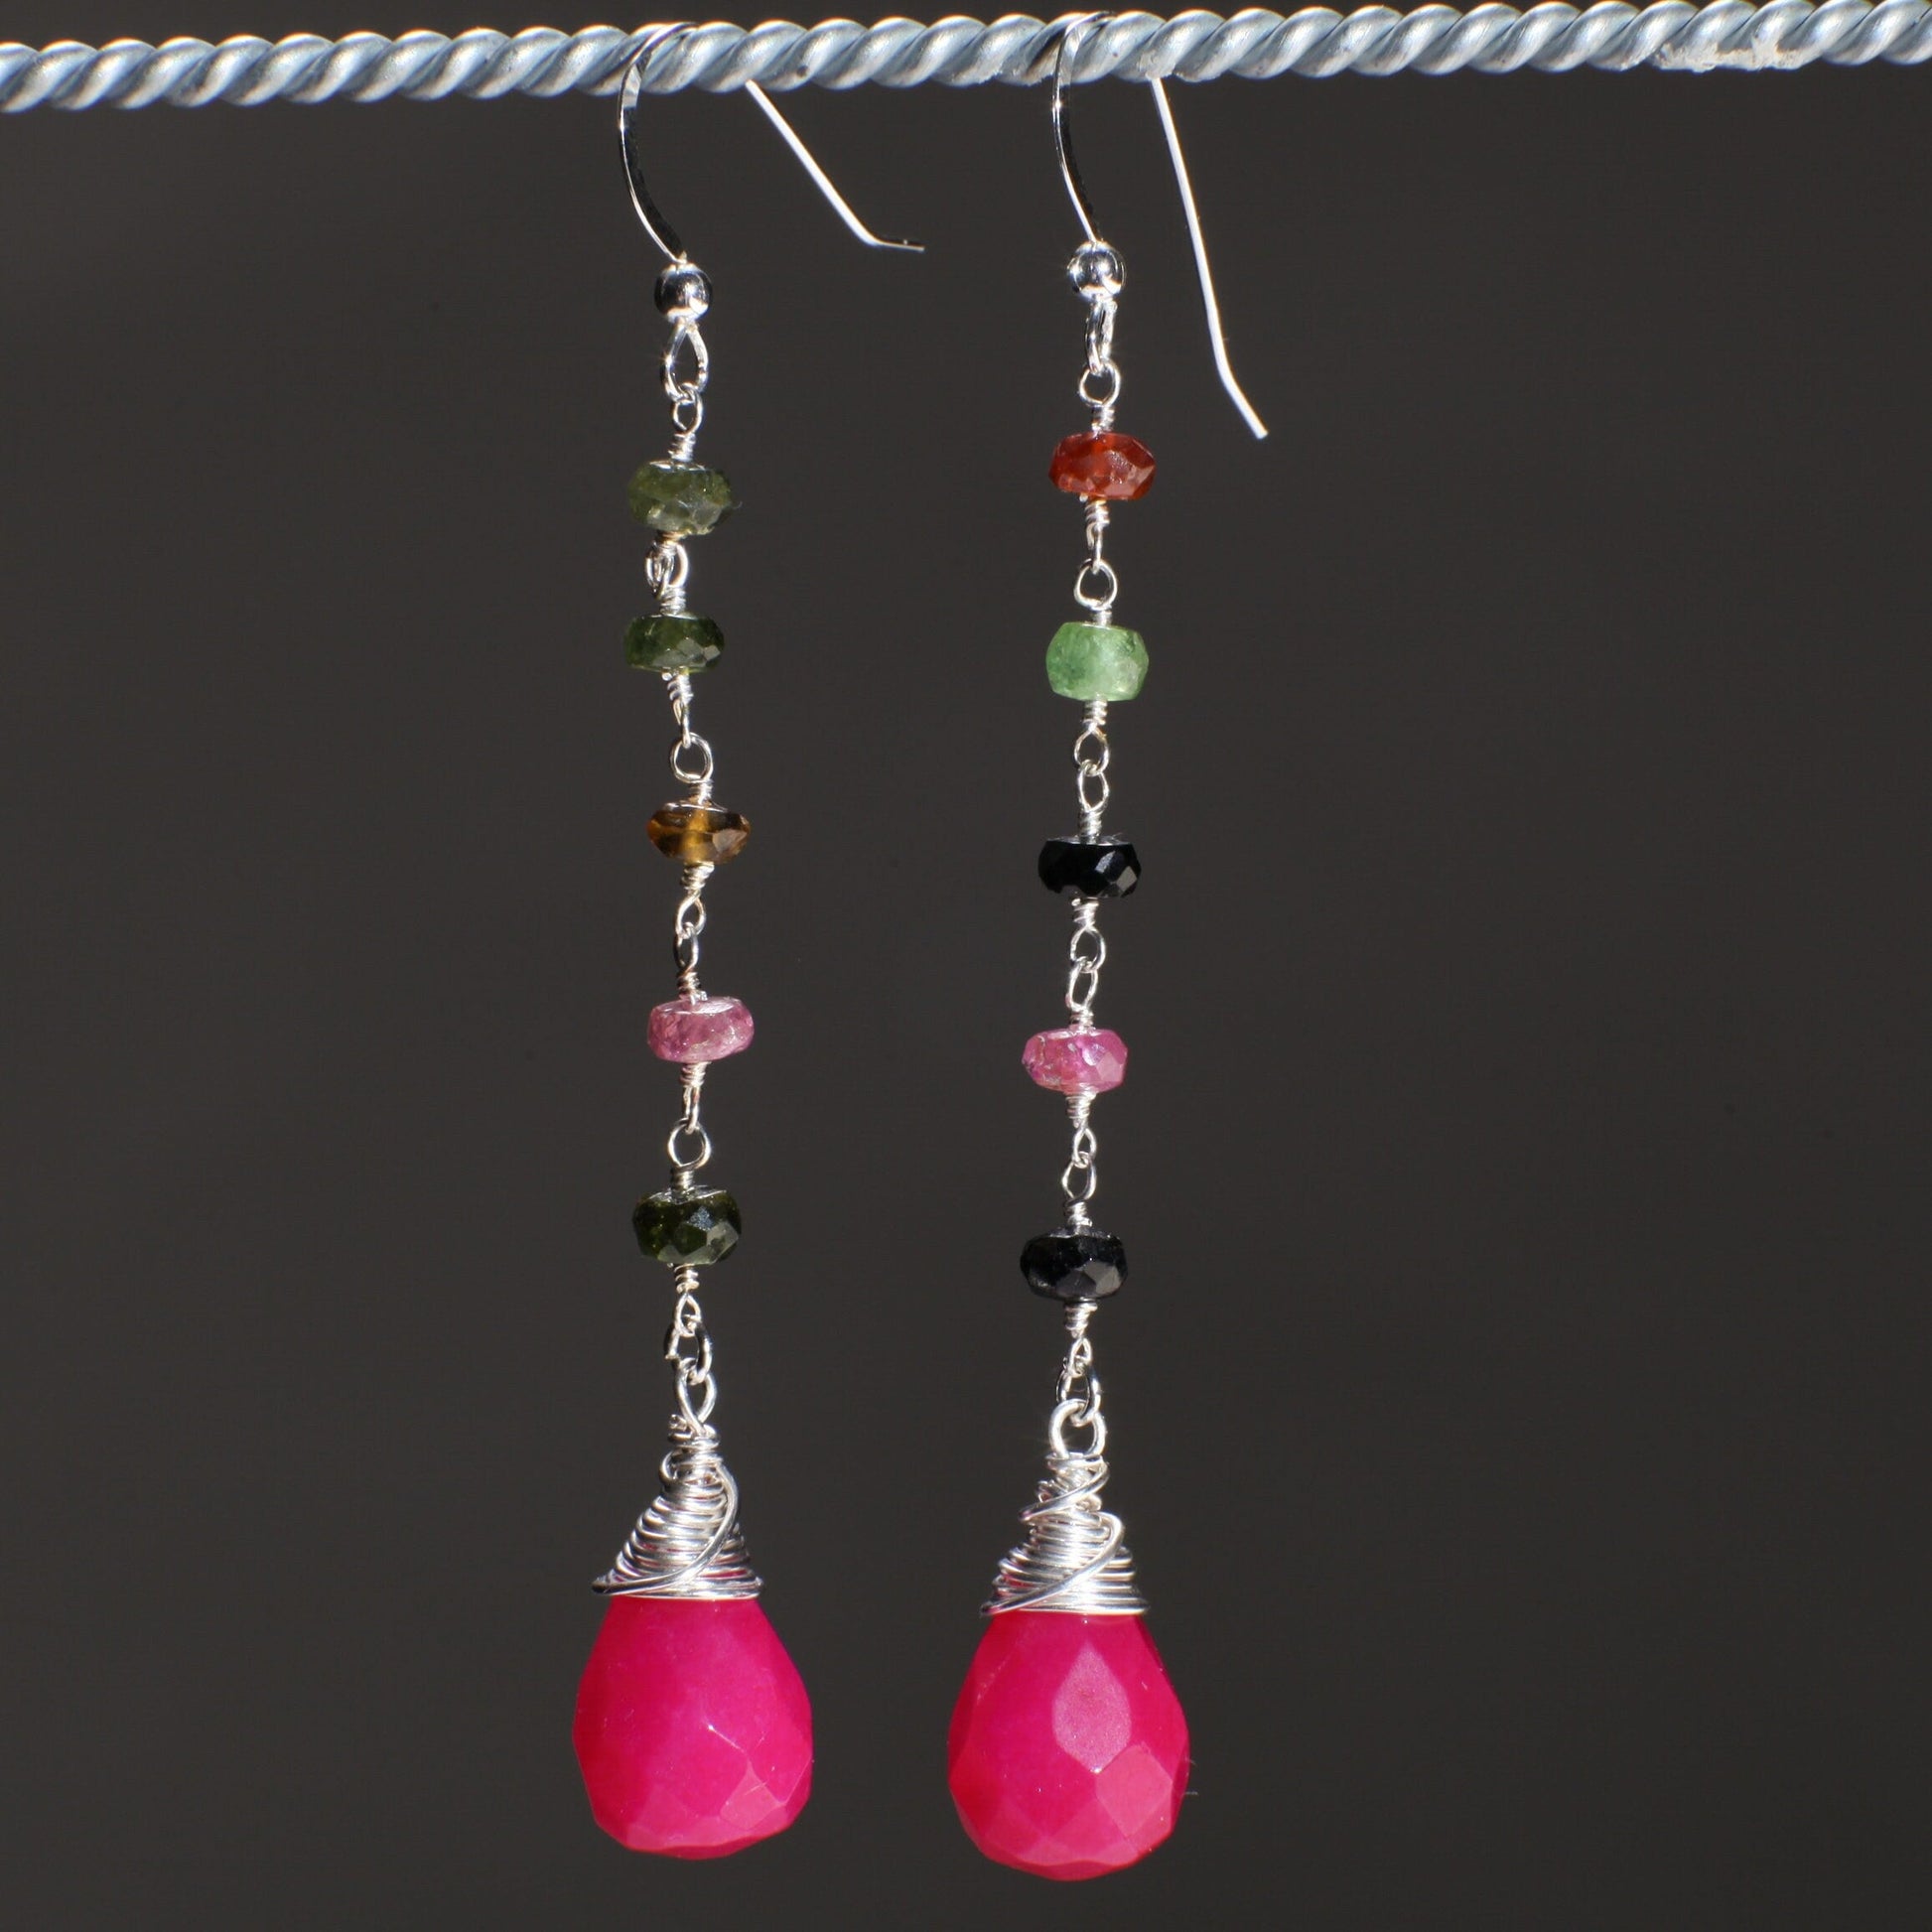 Watermelon Tourmaline Wire Wrapped Dangling Fuchsia Hot Pink Quartz in 925 Sterling Silver Earwire, Handmade Gift For Her